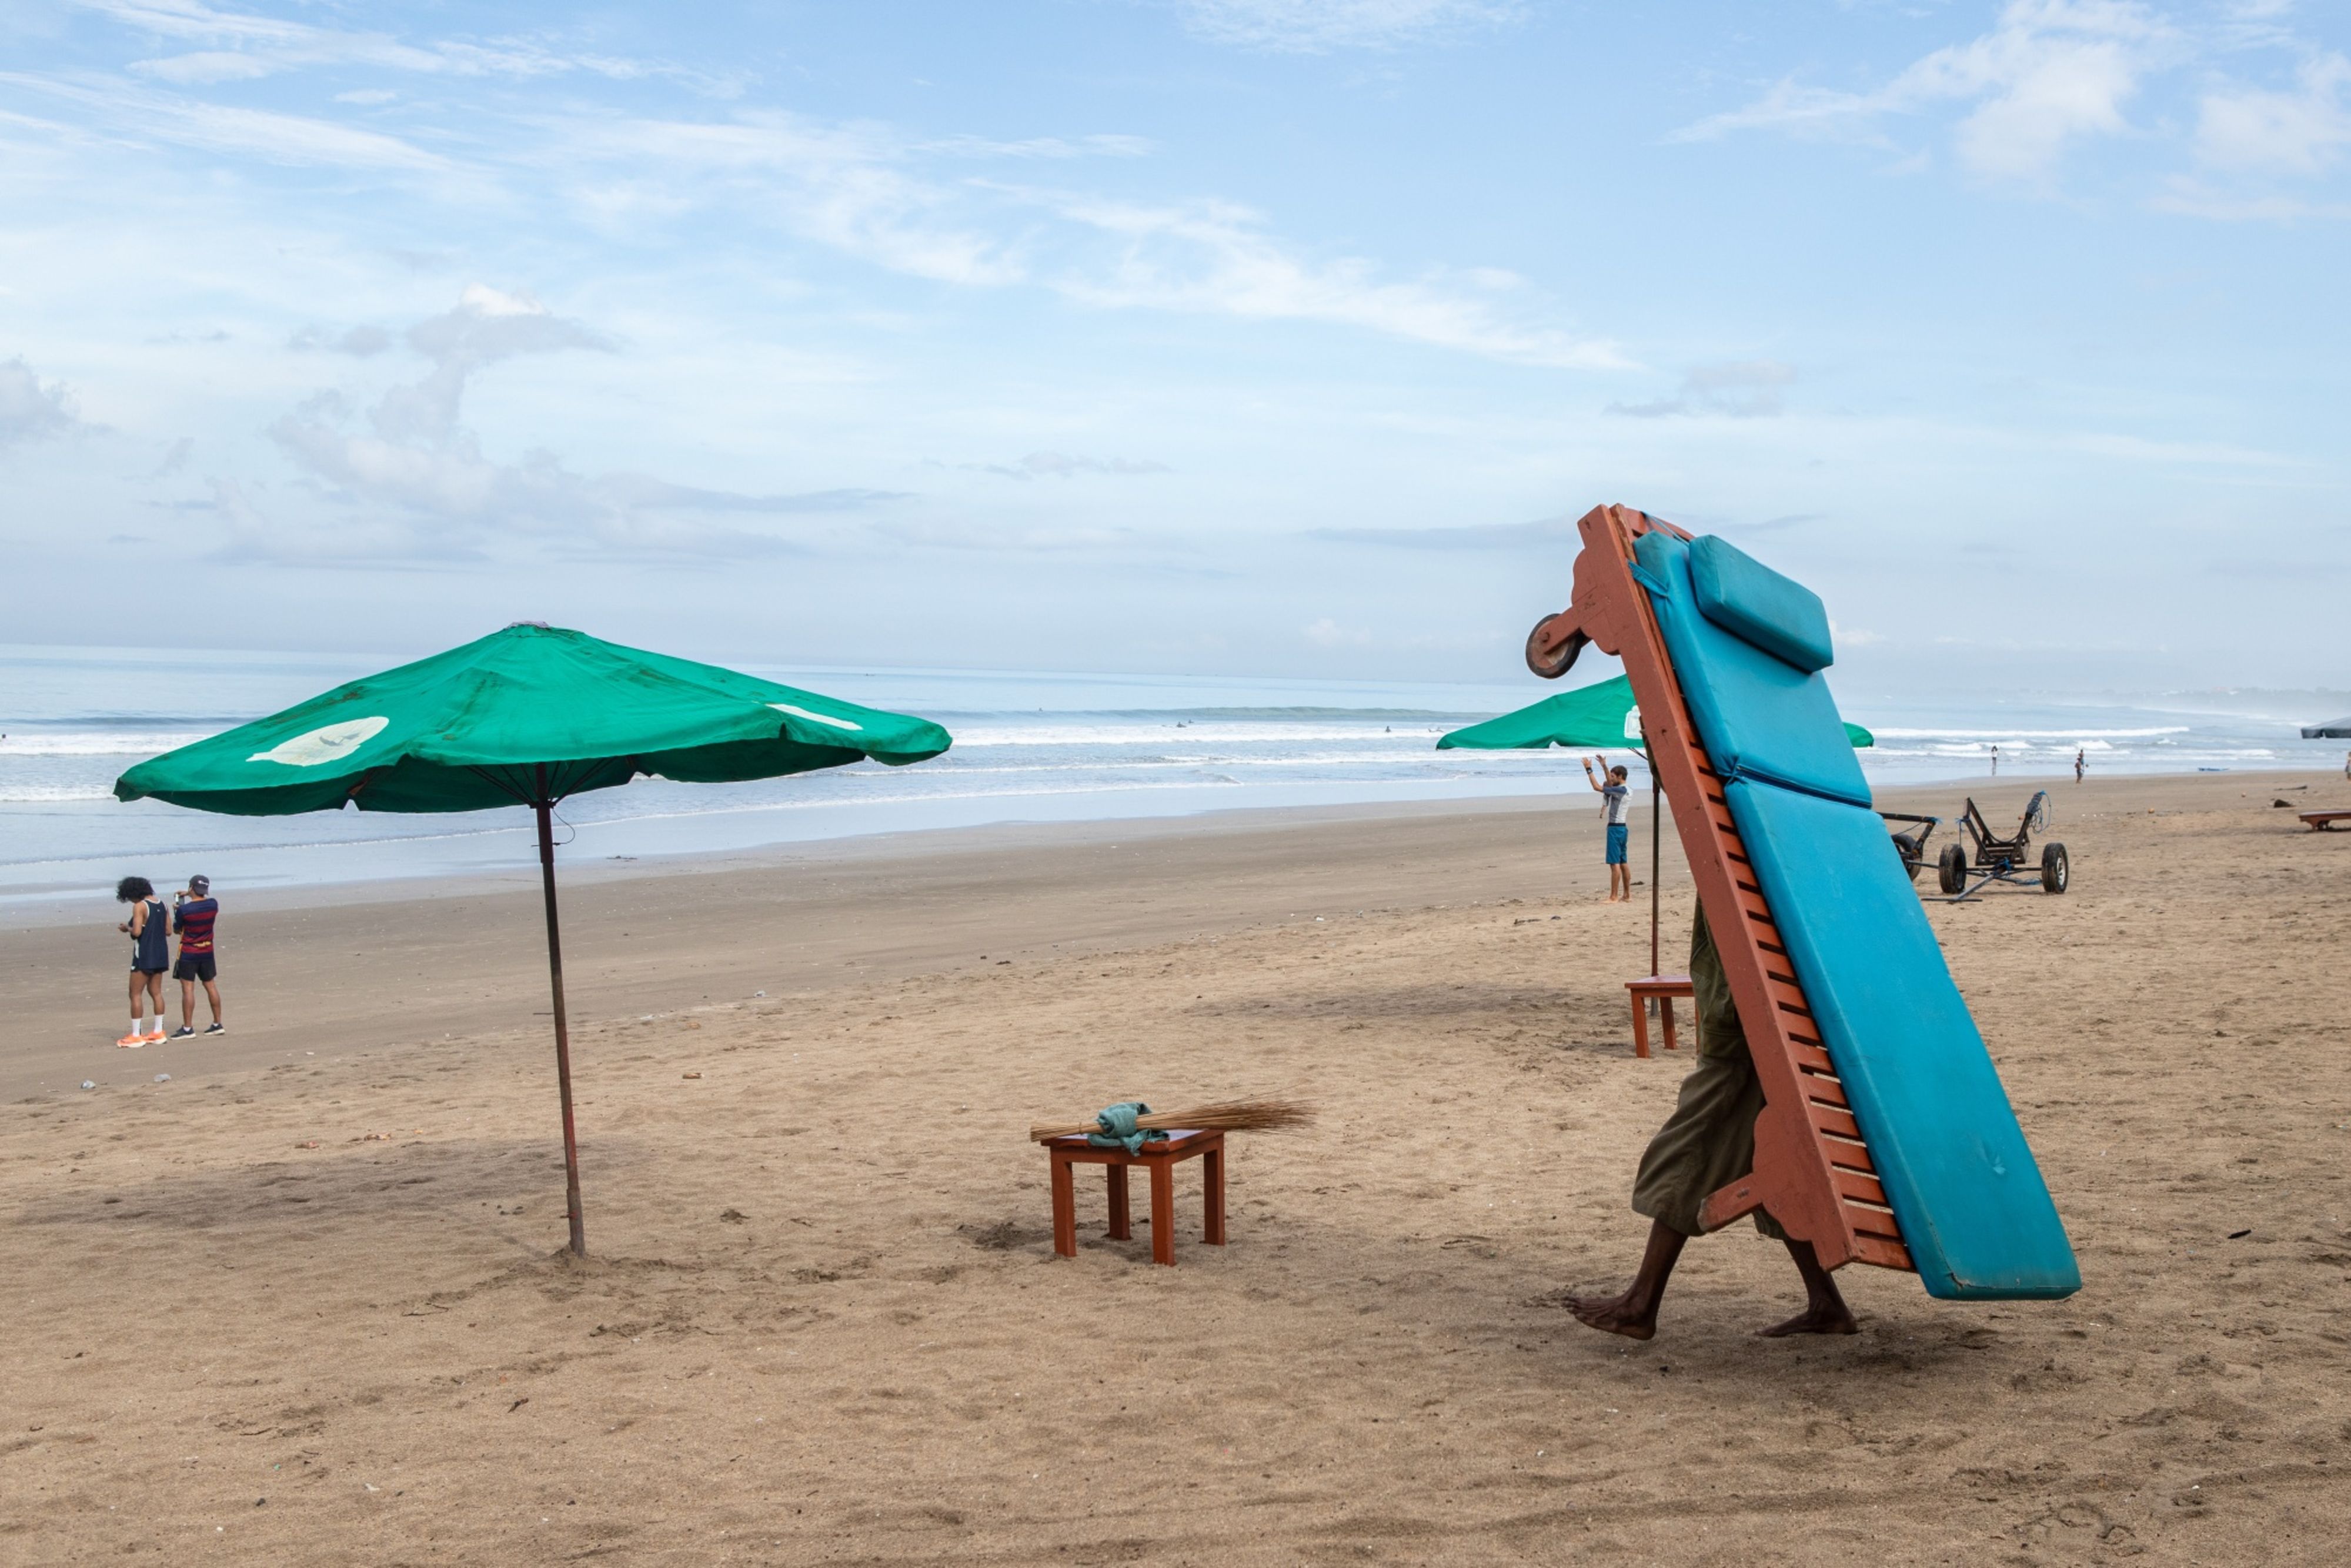 A man carries a lounge chair at the beach in the Kuta area of Bali, Indonesia, on Friday, Oct. 29, 2021. (© 2021 Bloomberg Finance LP)